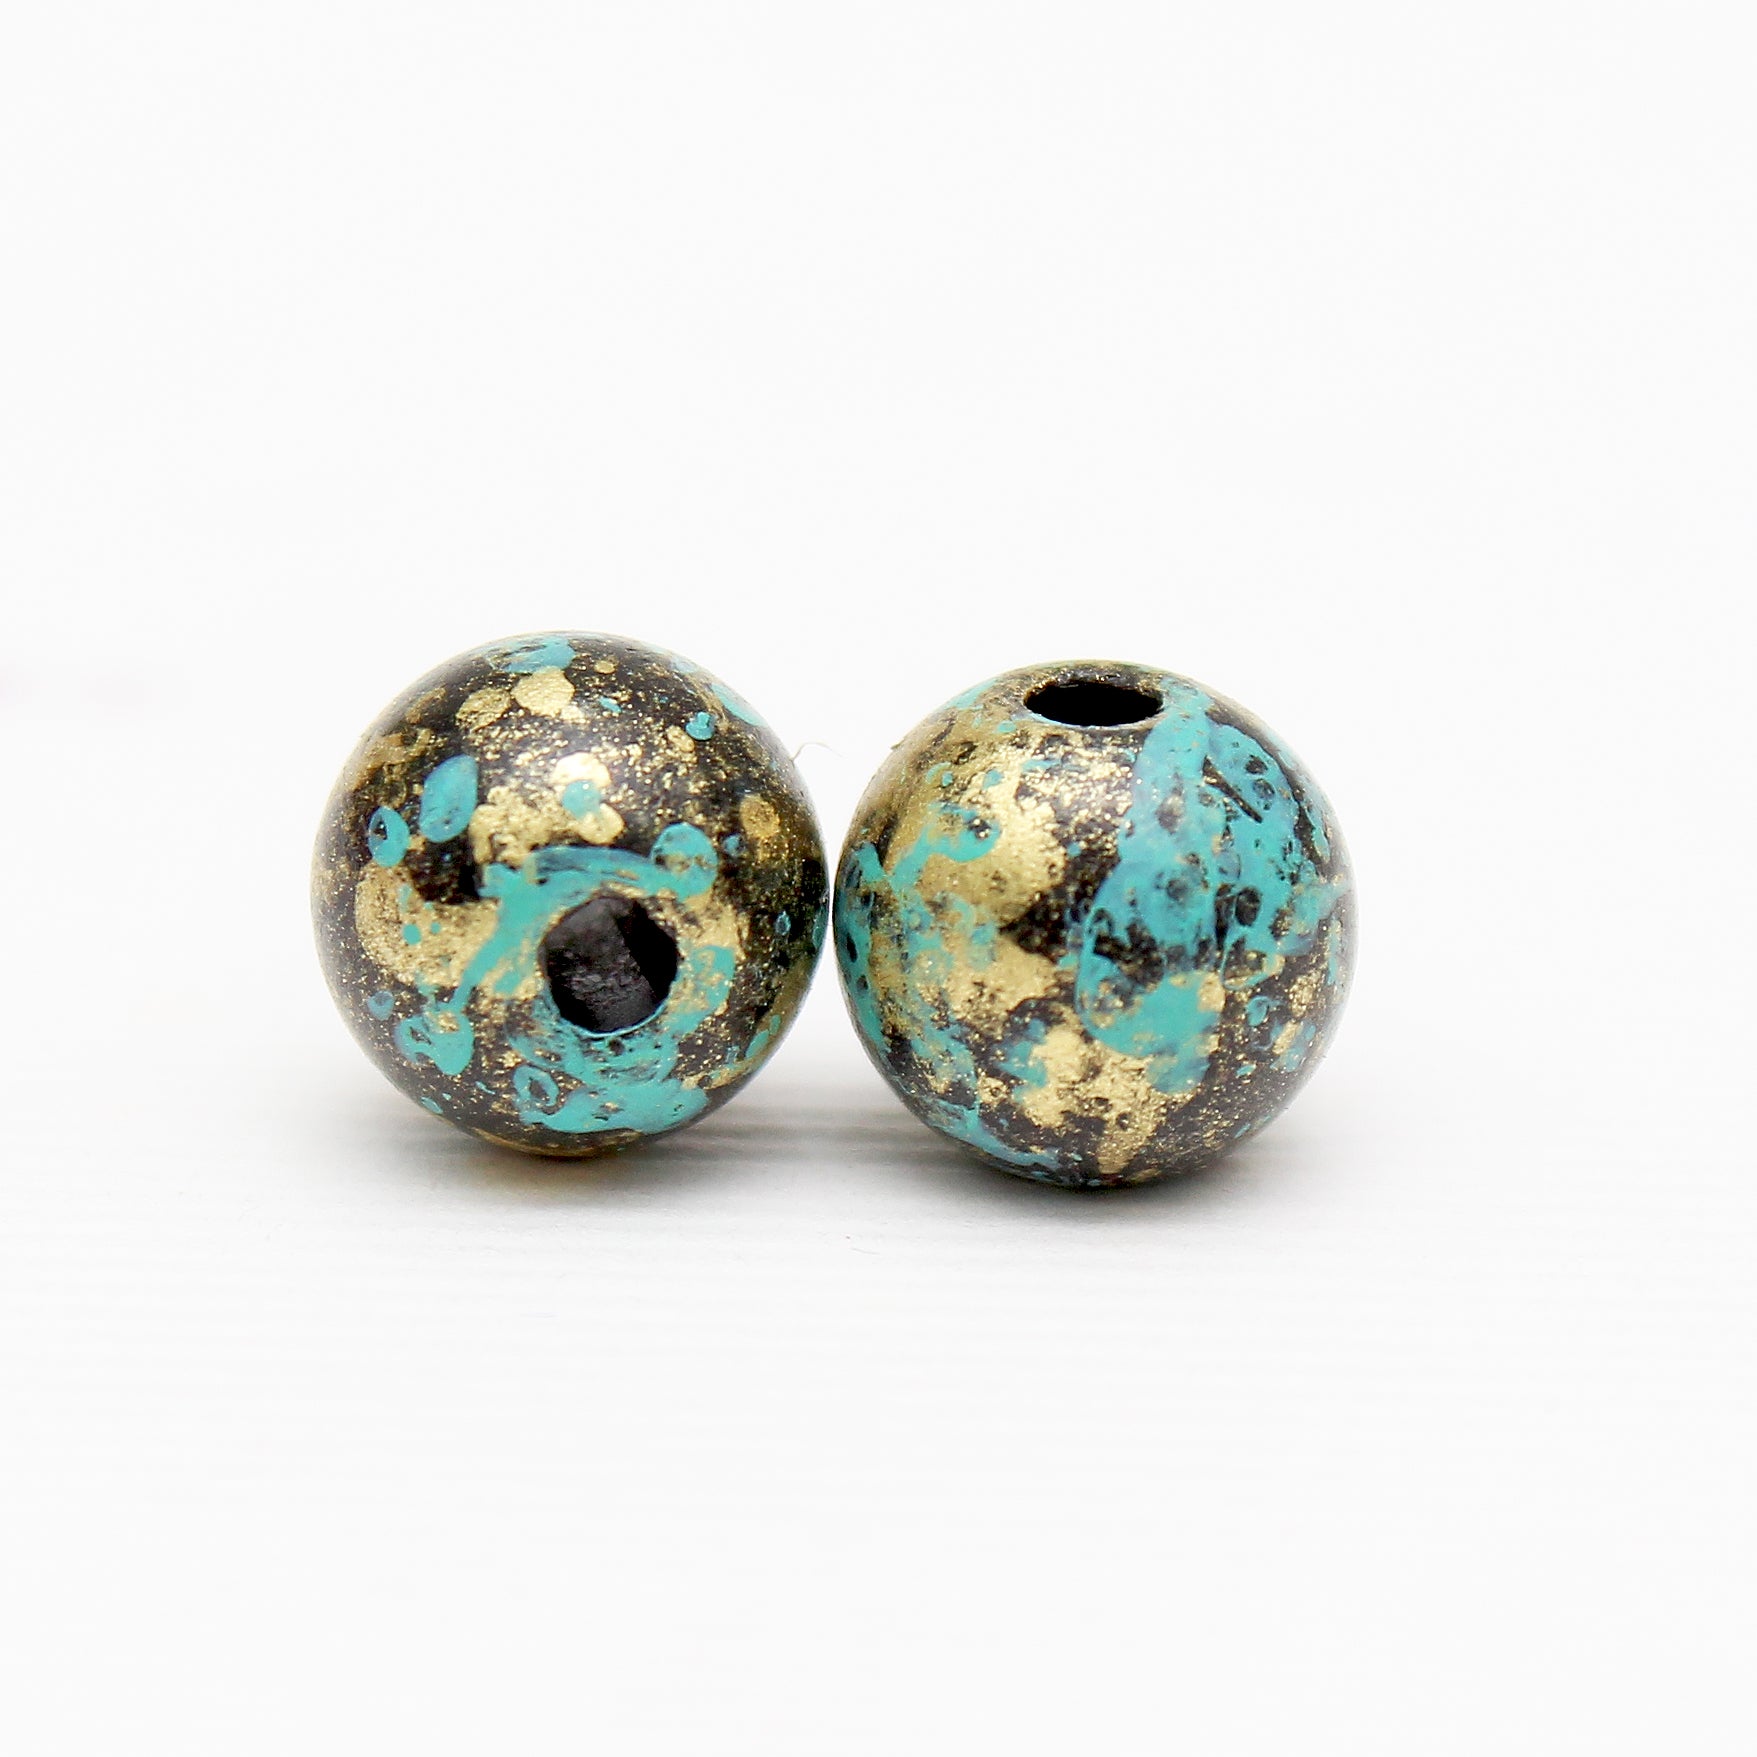 Beads Turquoise Gold Marbled Round 7Mm X 7Mm 30G Pb Ib